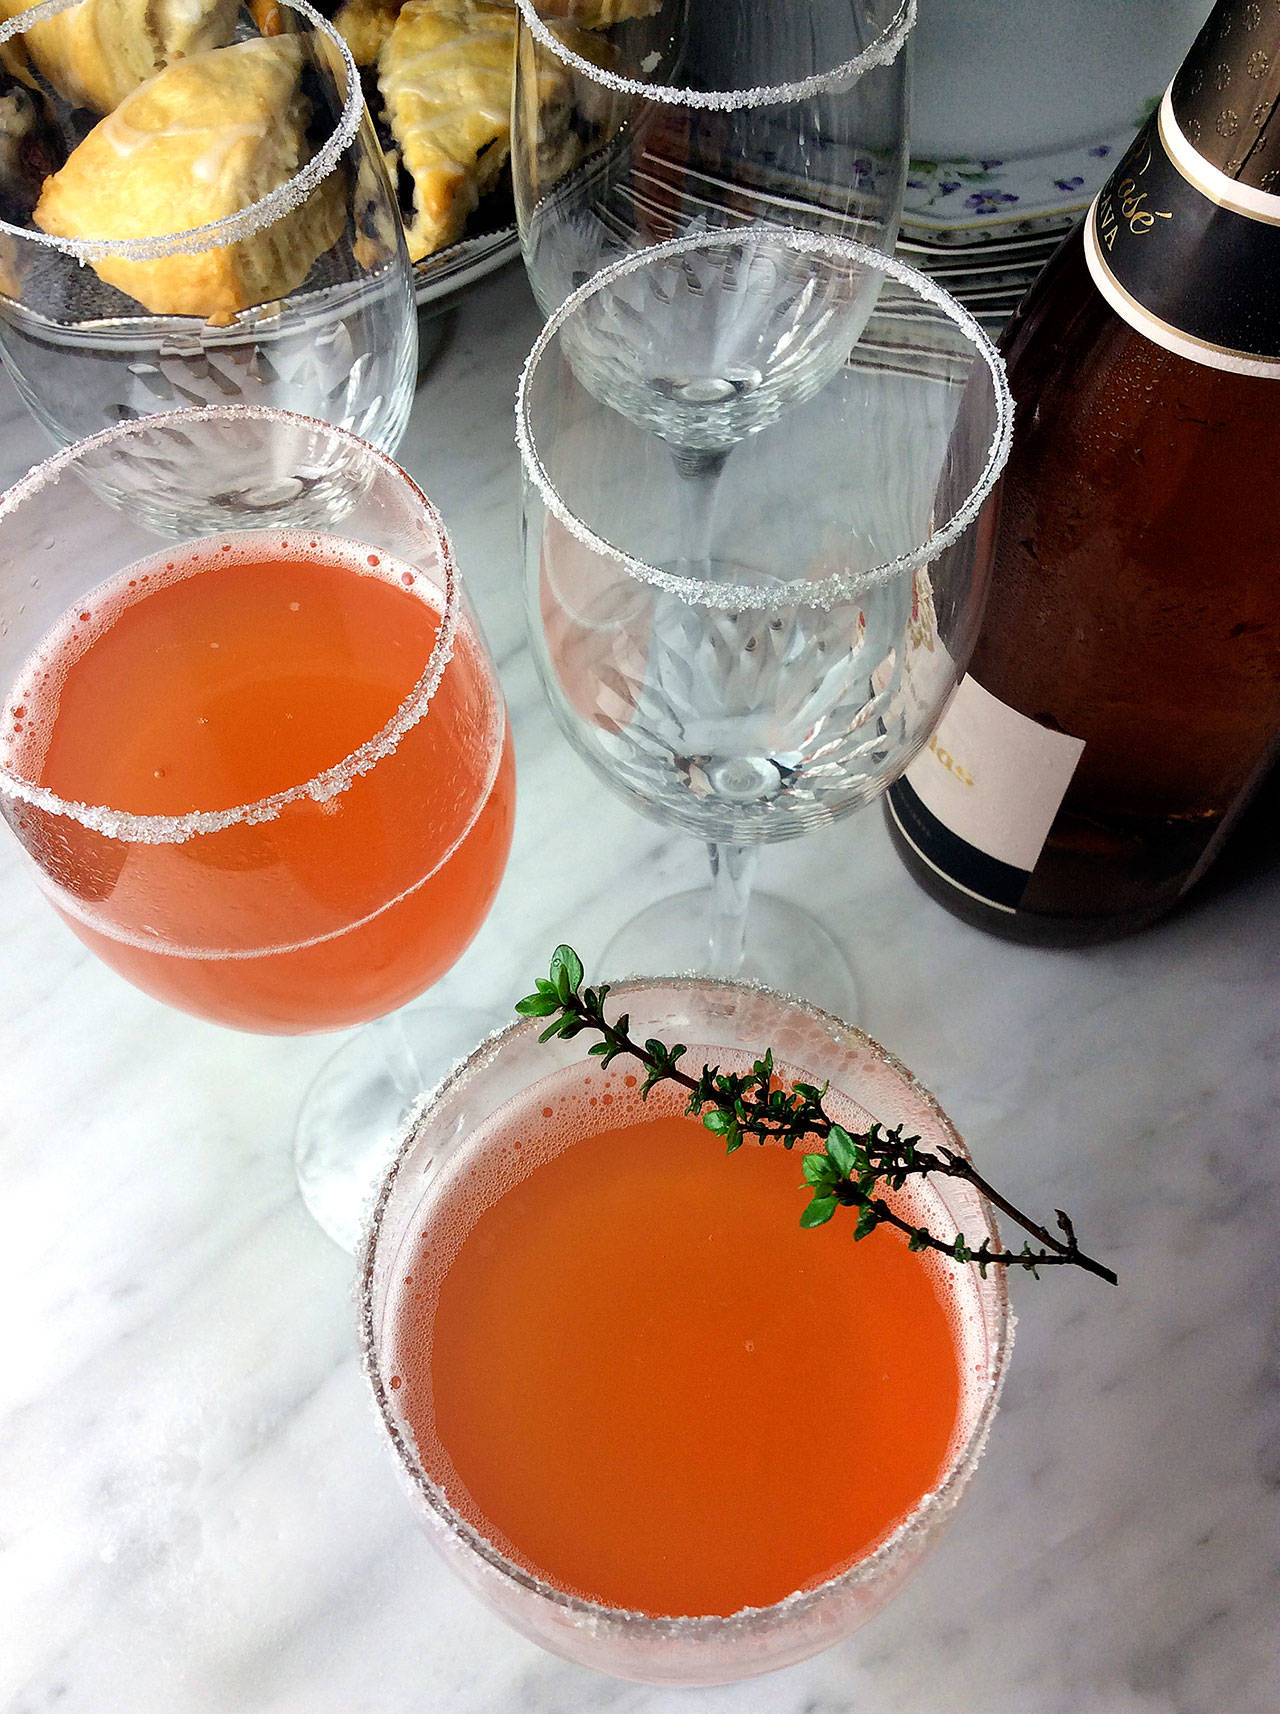 A mimosa made with a sparkling blood orange soft drink instead of orange juice is a flavorful and colorful variation of the classic brunch drink. (Photo by Jan Roberts-Dominguez)